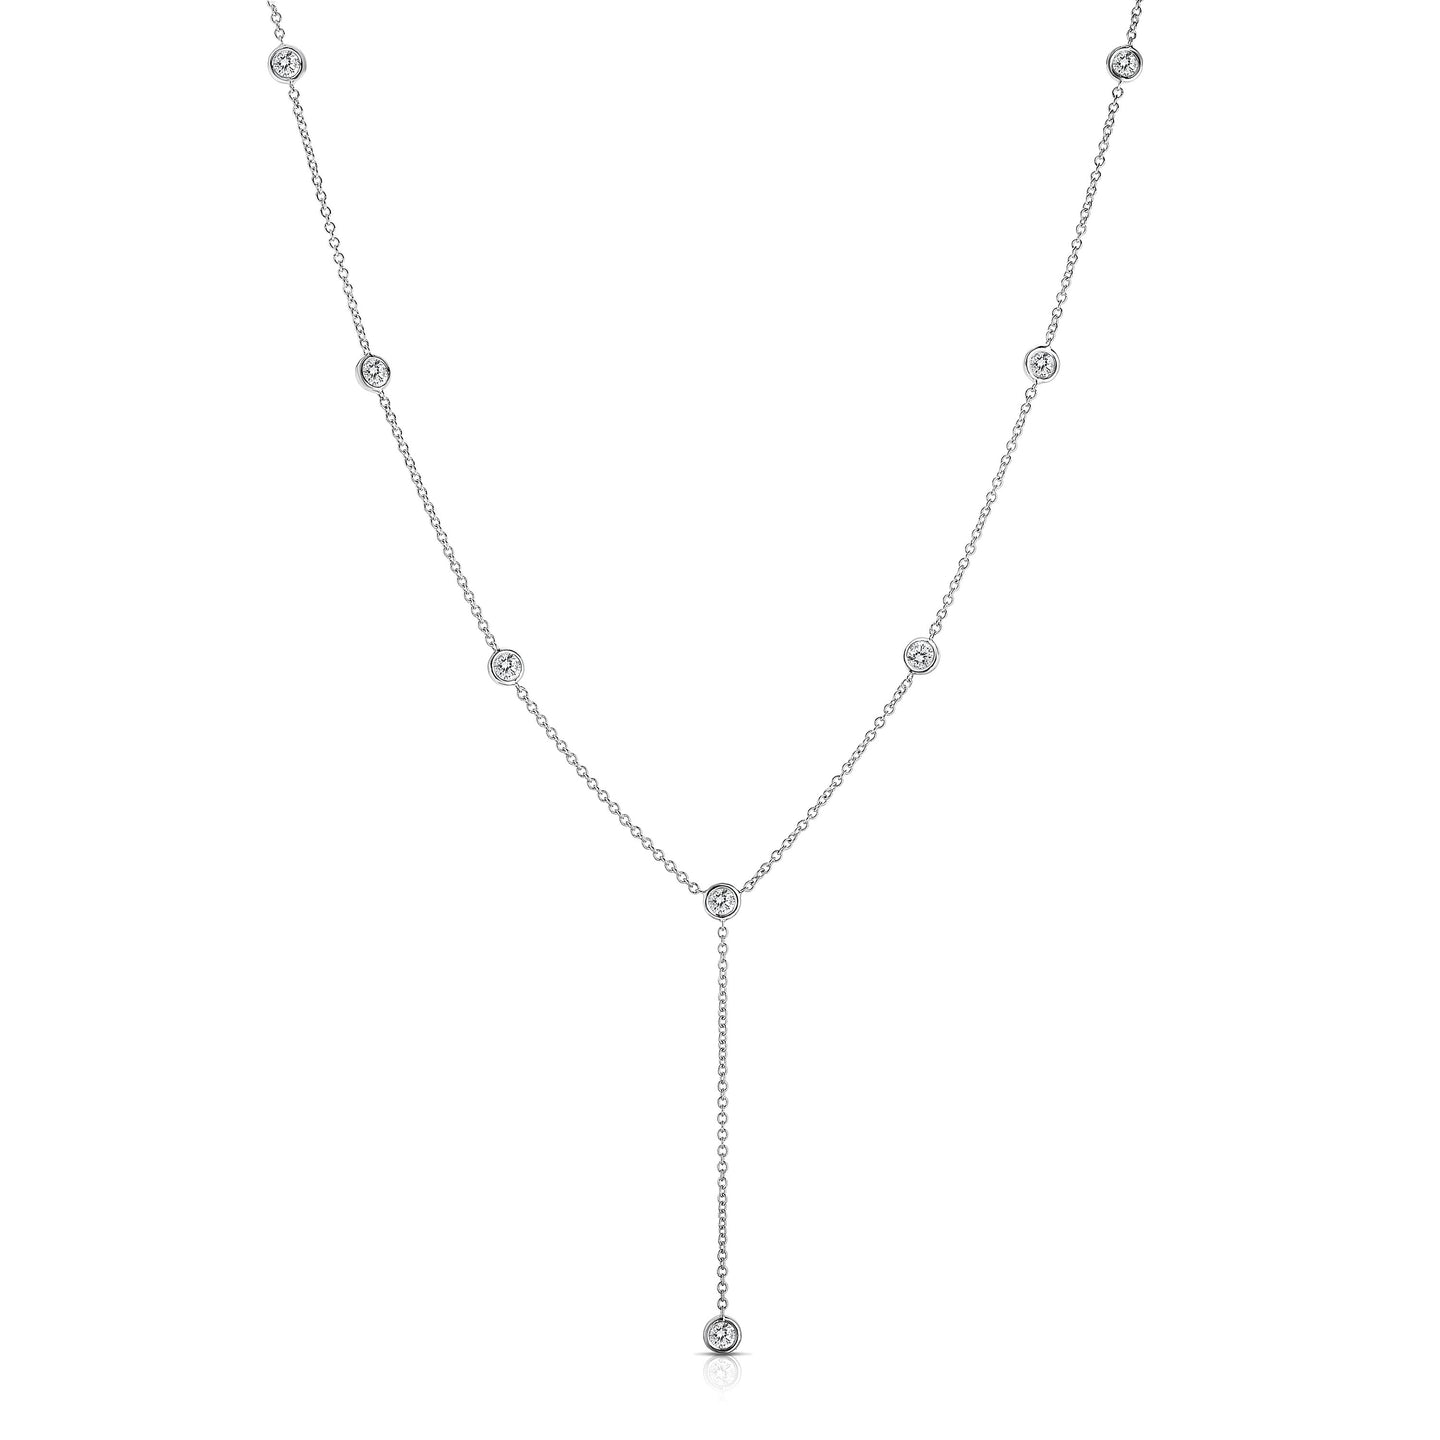 Sabel Collection 14K White Gold Station Diamond by Yard Drop Necklace